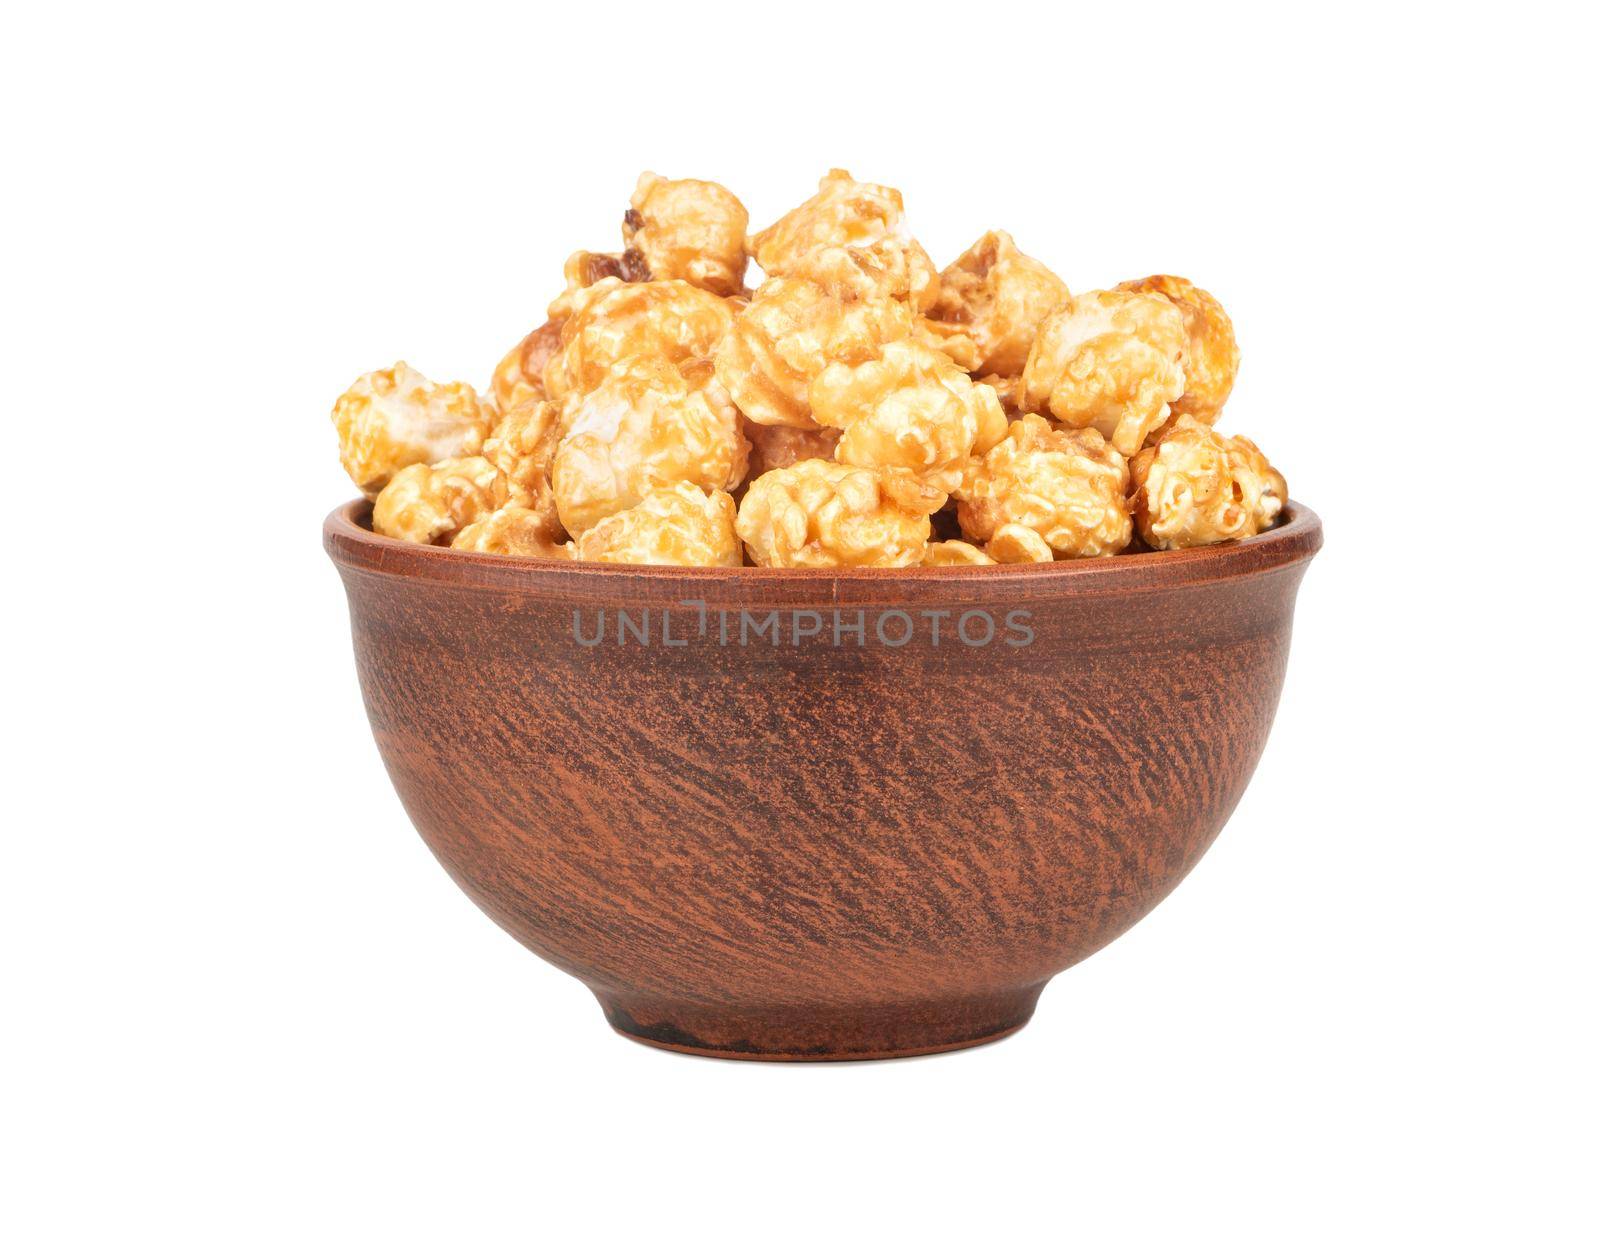 Caramel popcorn in bowl by andregric